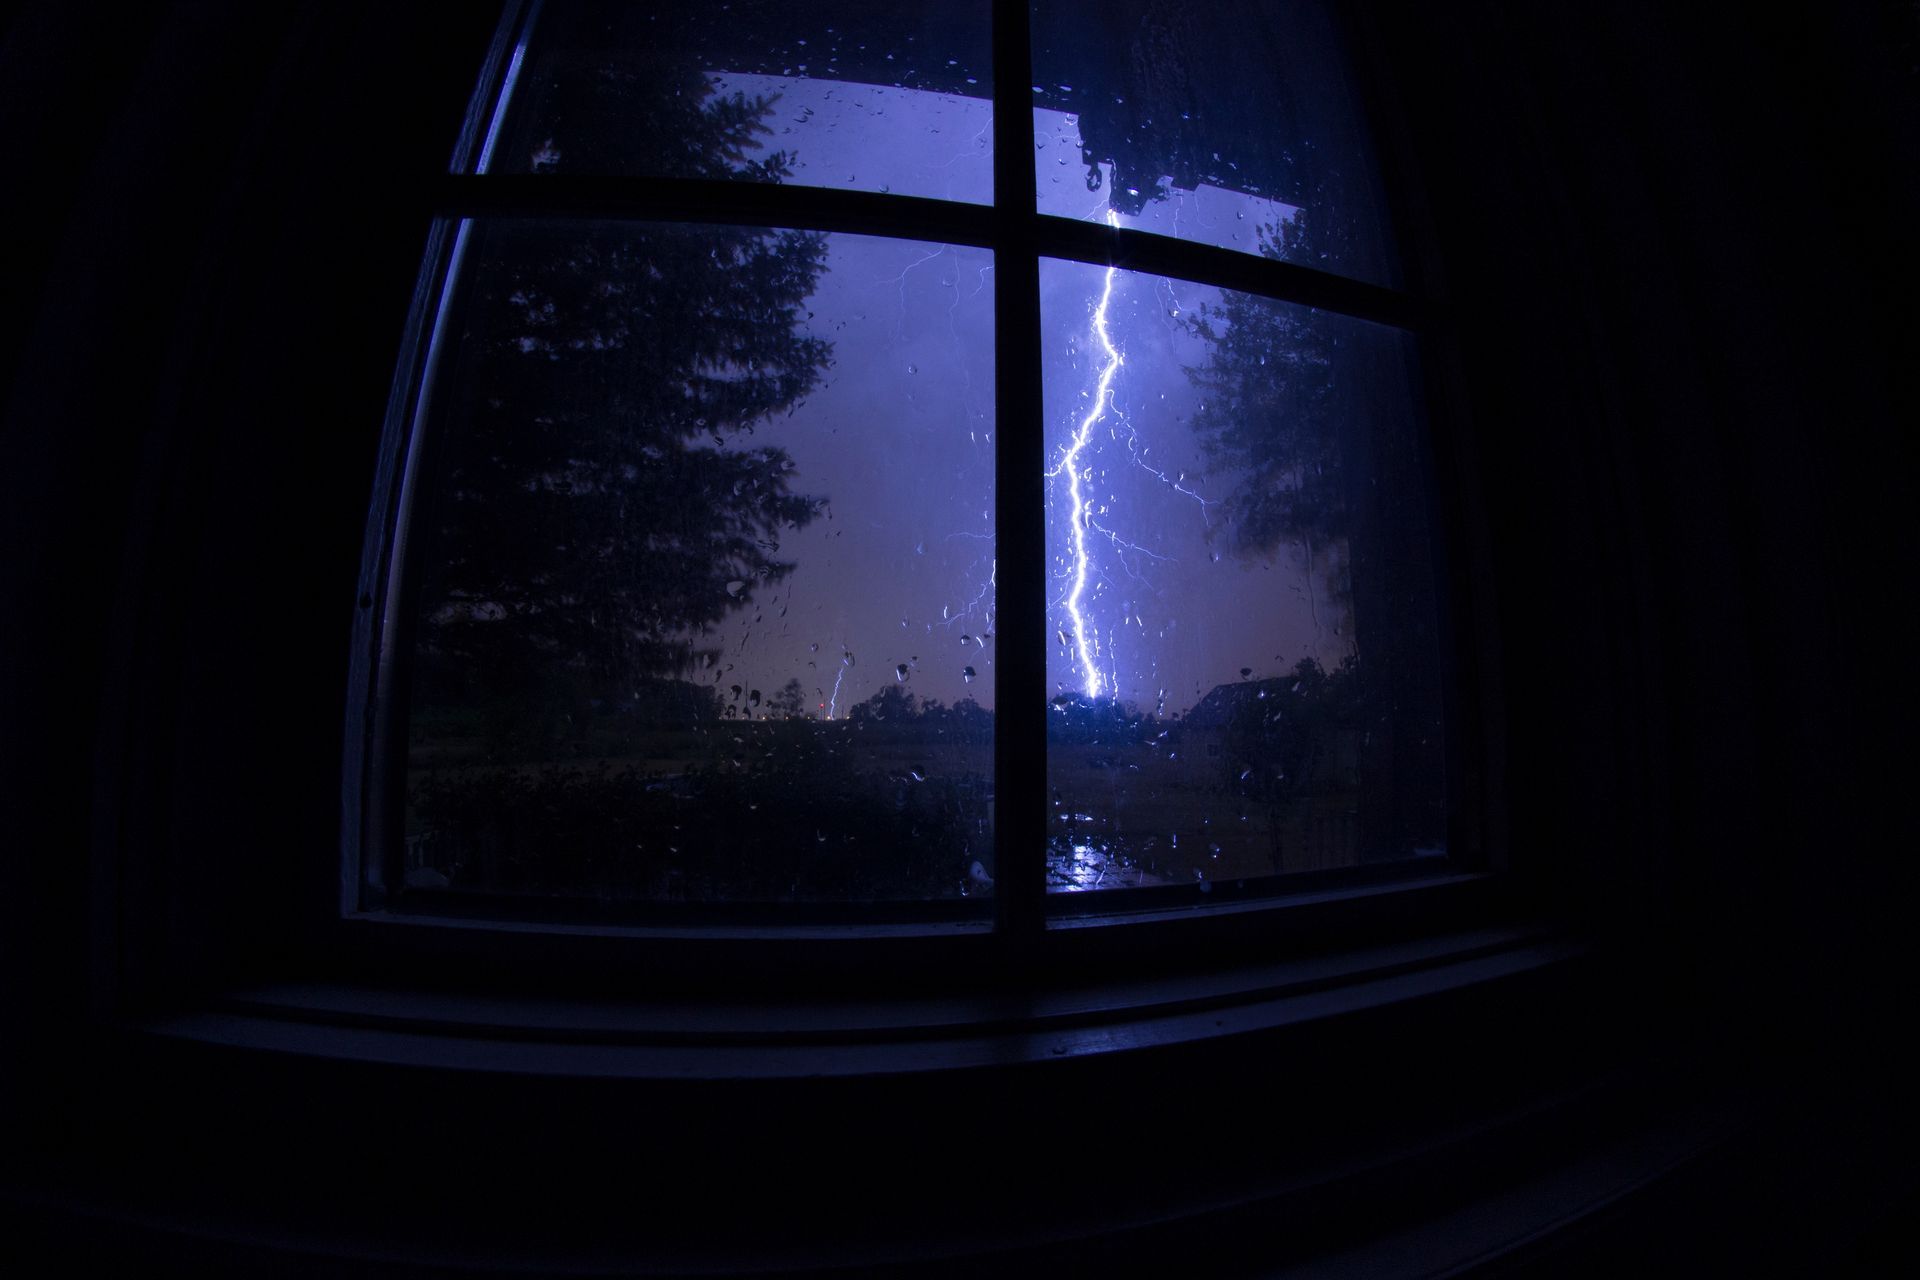 a lightning bolt is visible through a window at night